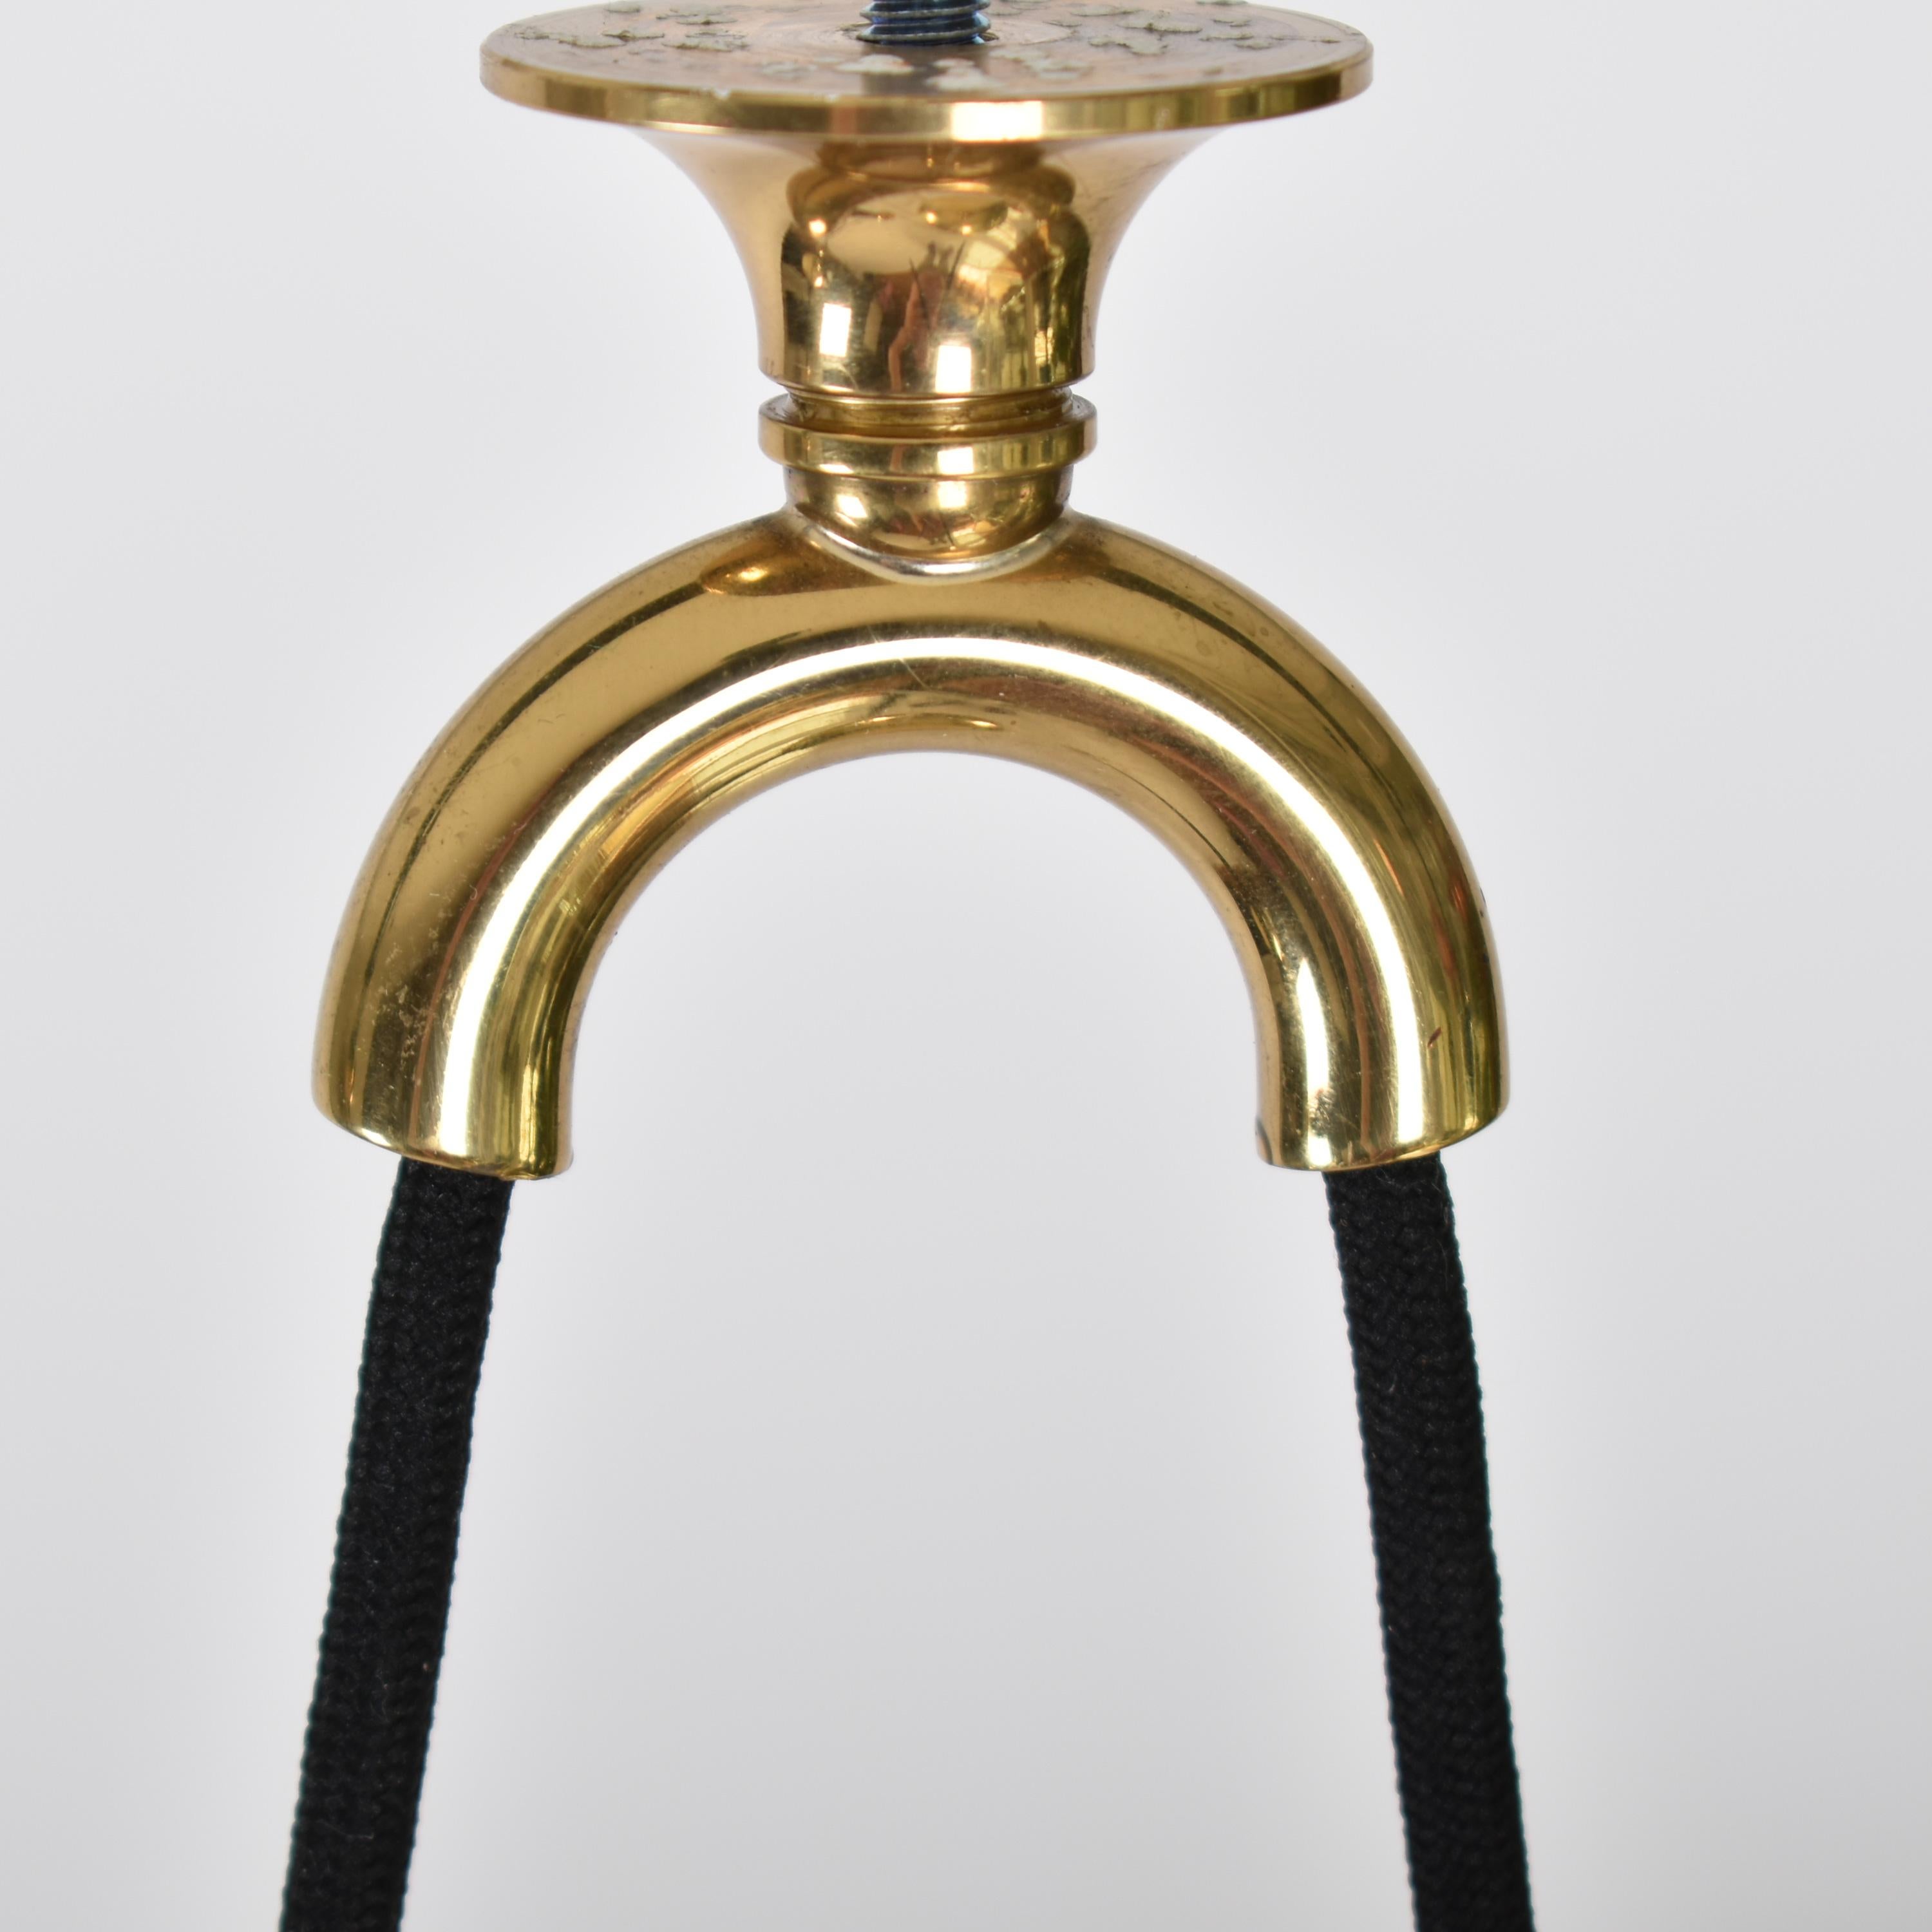 Late 20th Century Florian Schulz Double Counterbalance Brass Lamp, Germany, 1970